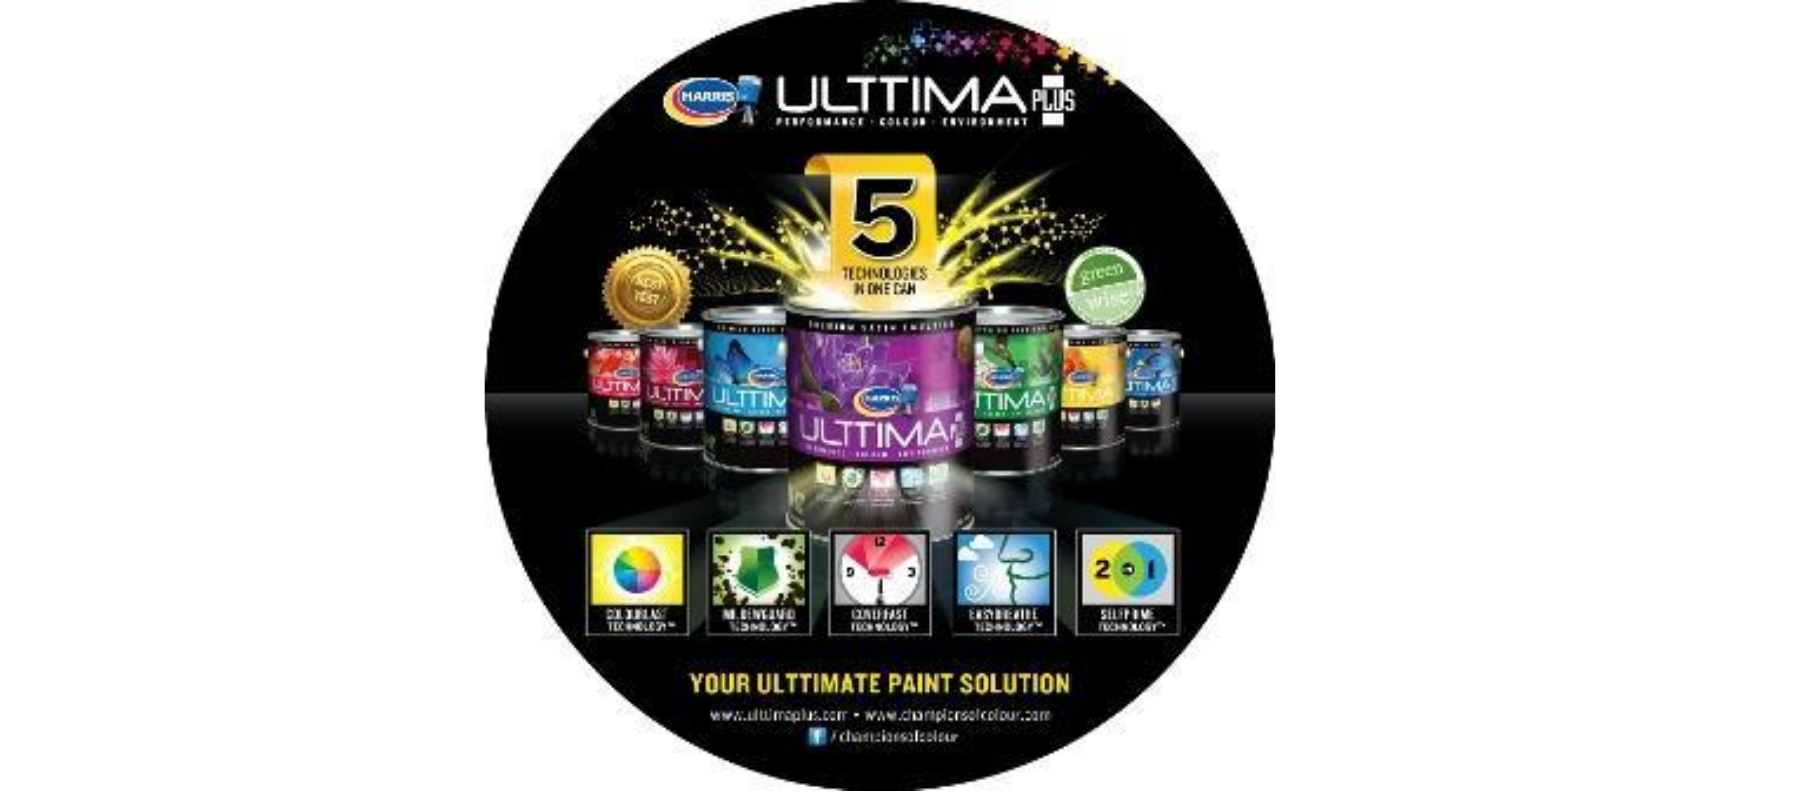 New Ulttima Plus Offers Longer Term Protection From Fungus & Mold